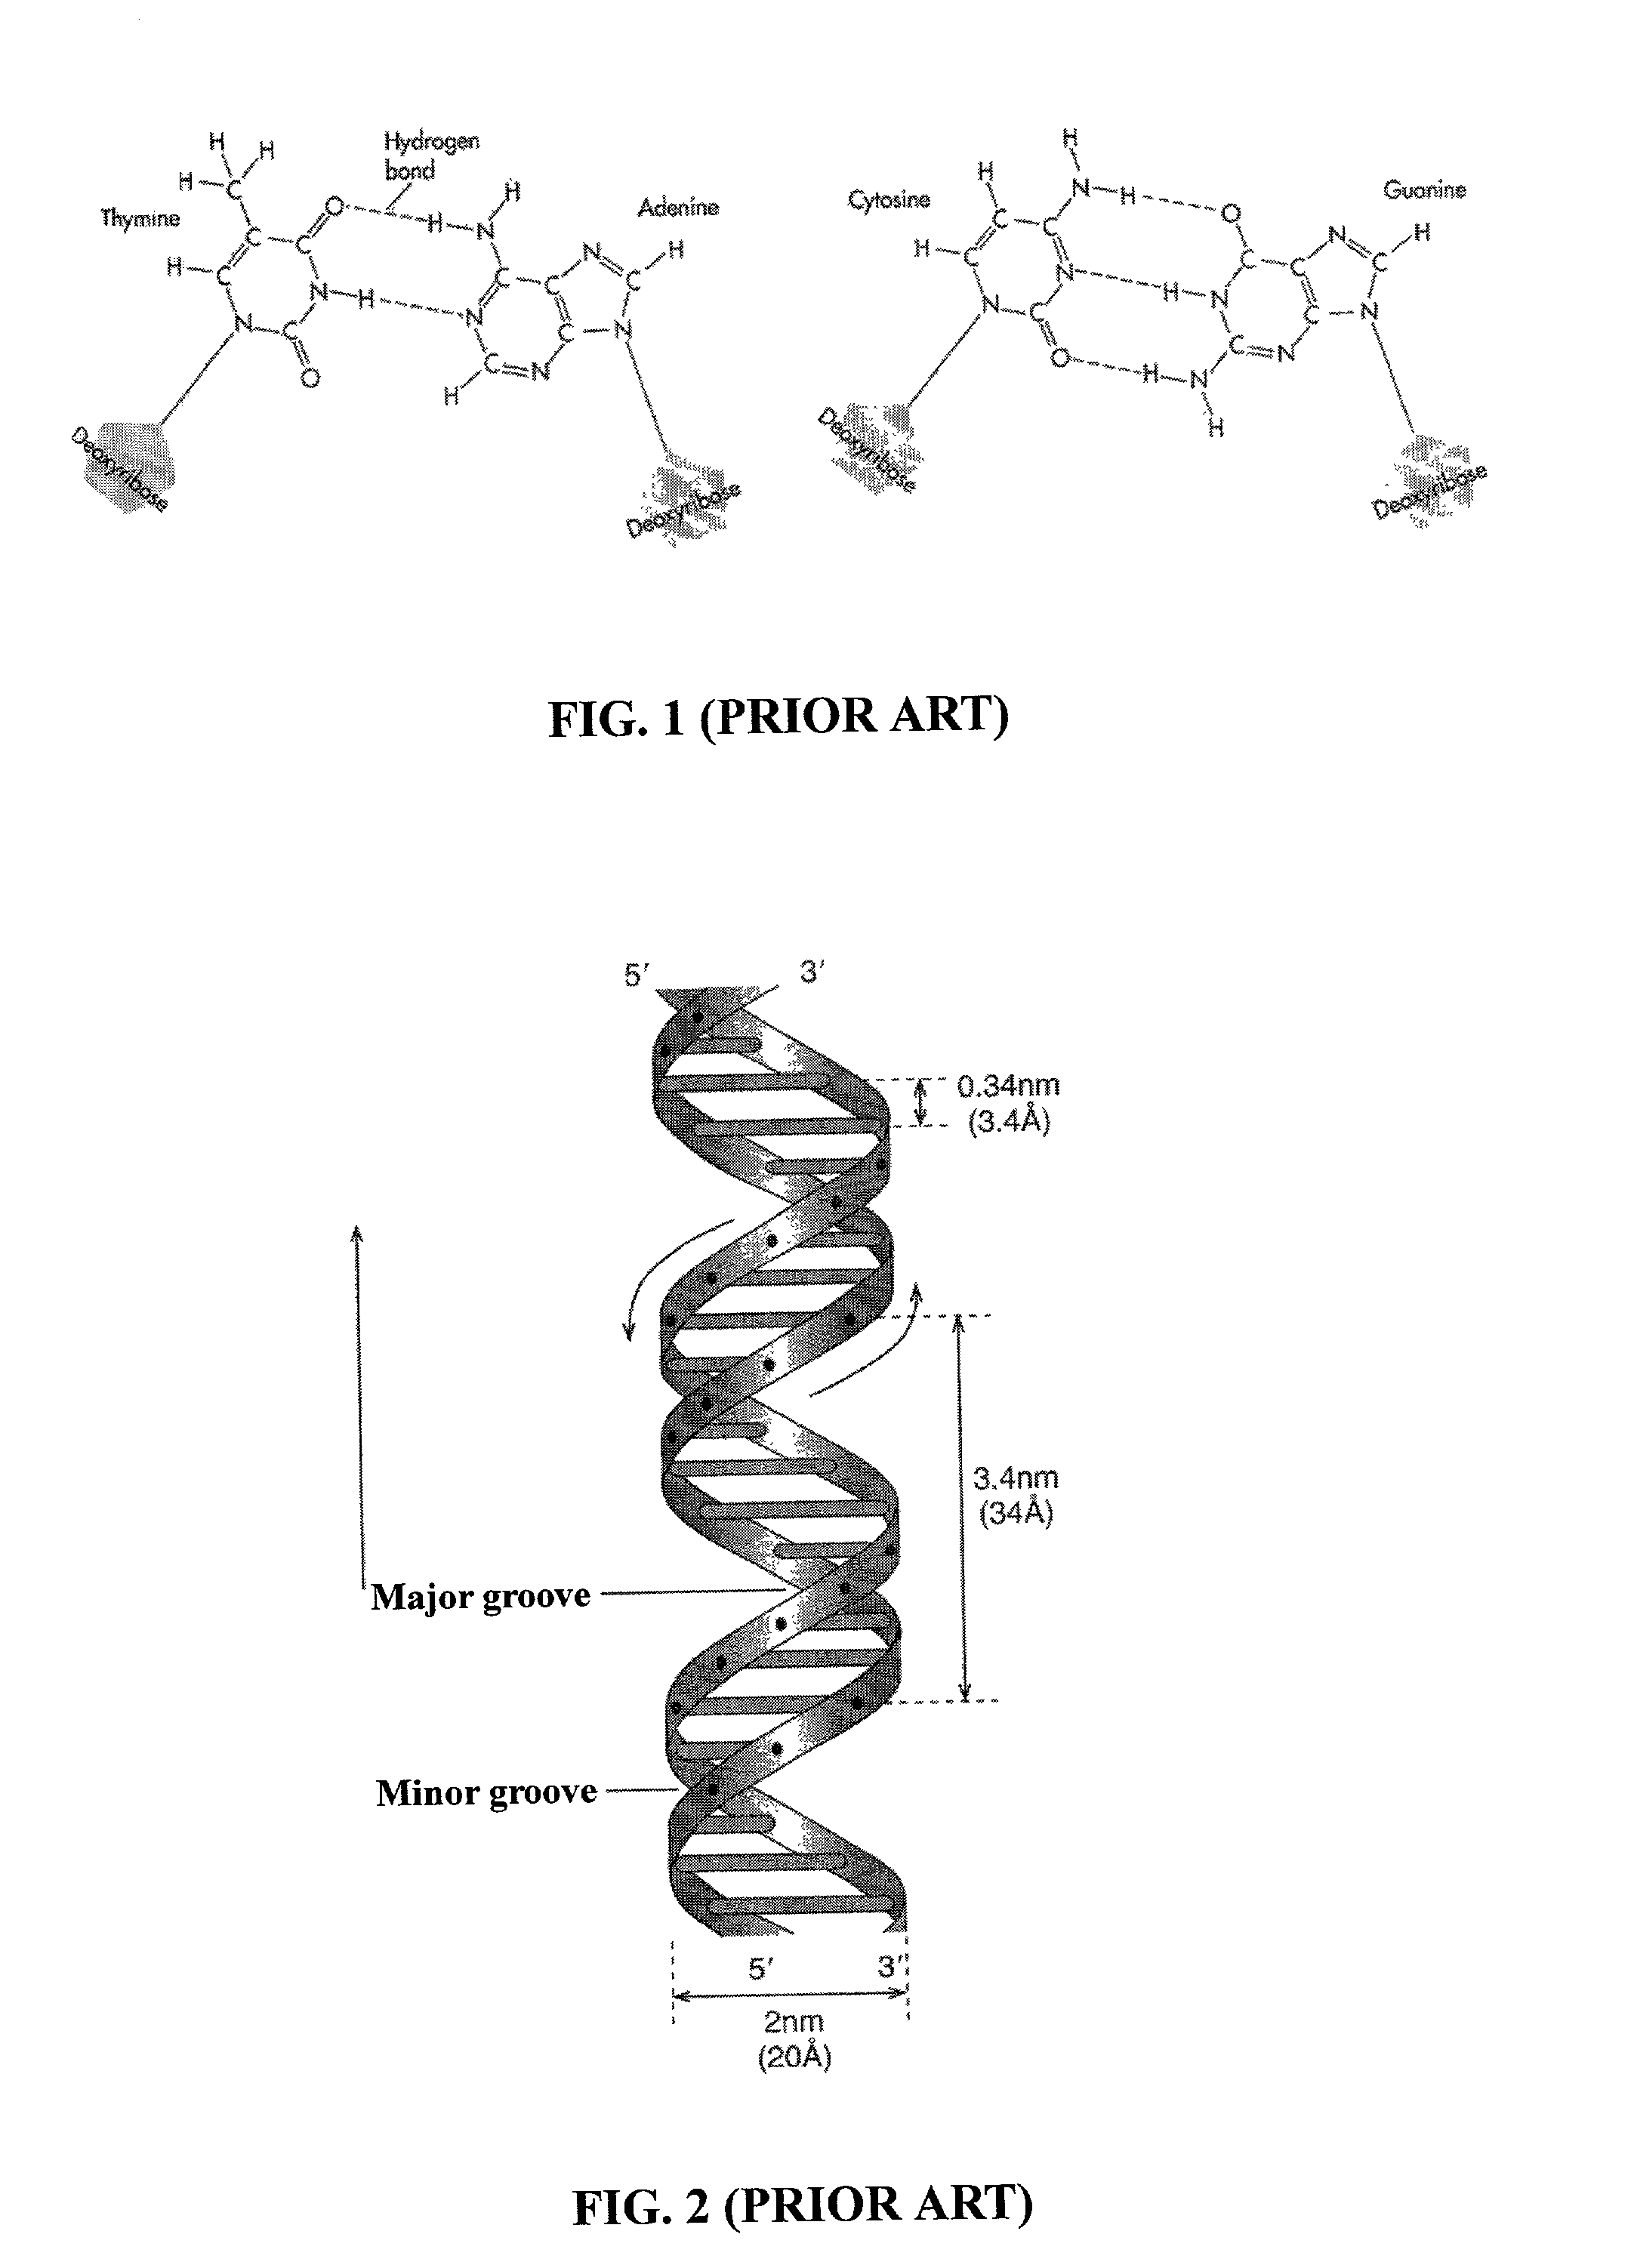 DNA-based integrated circuit